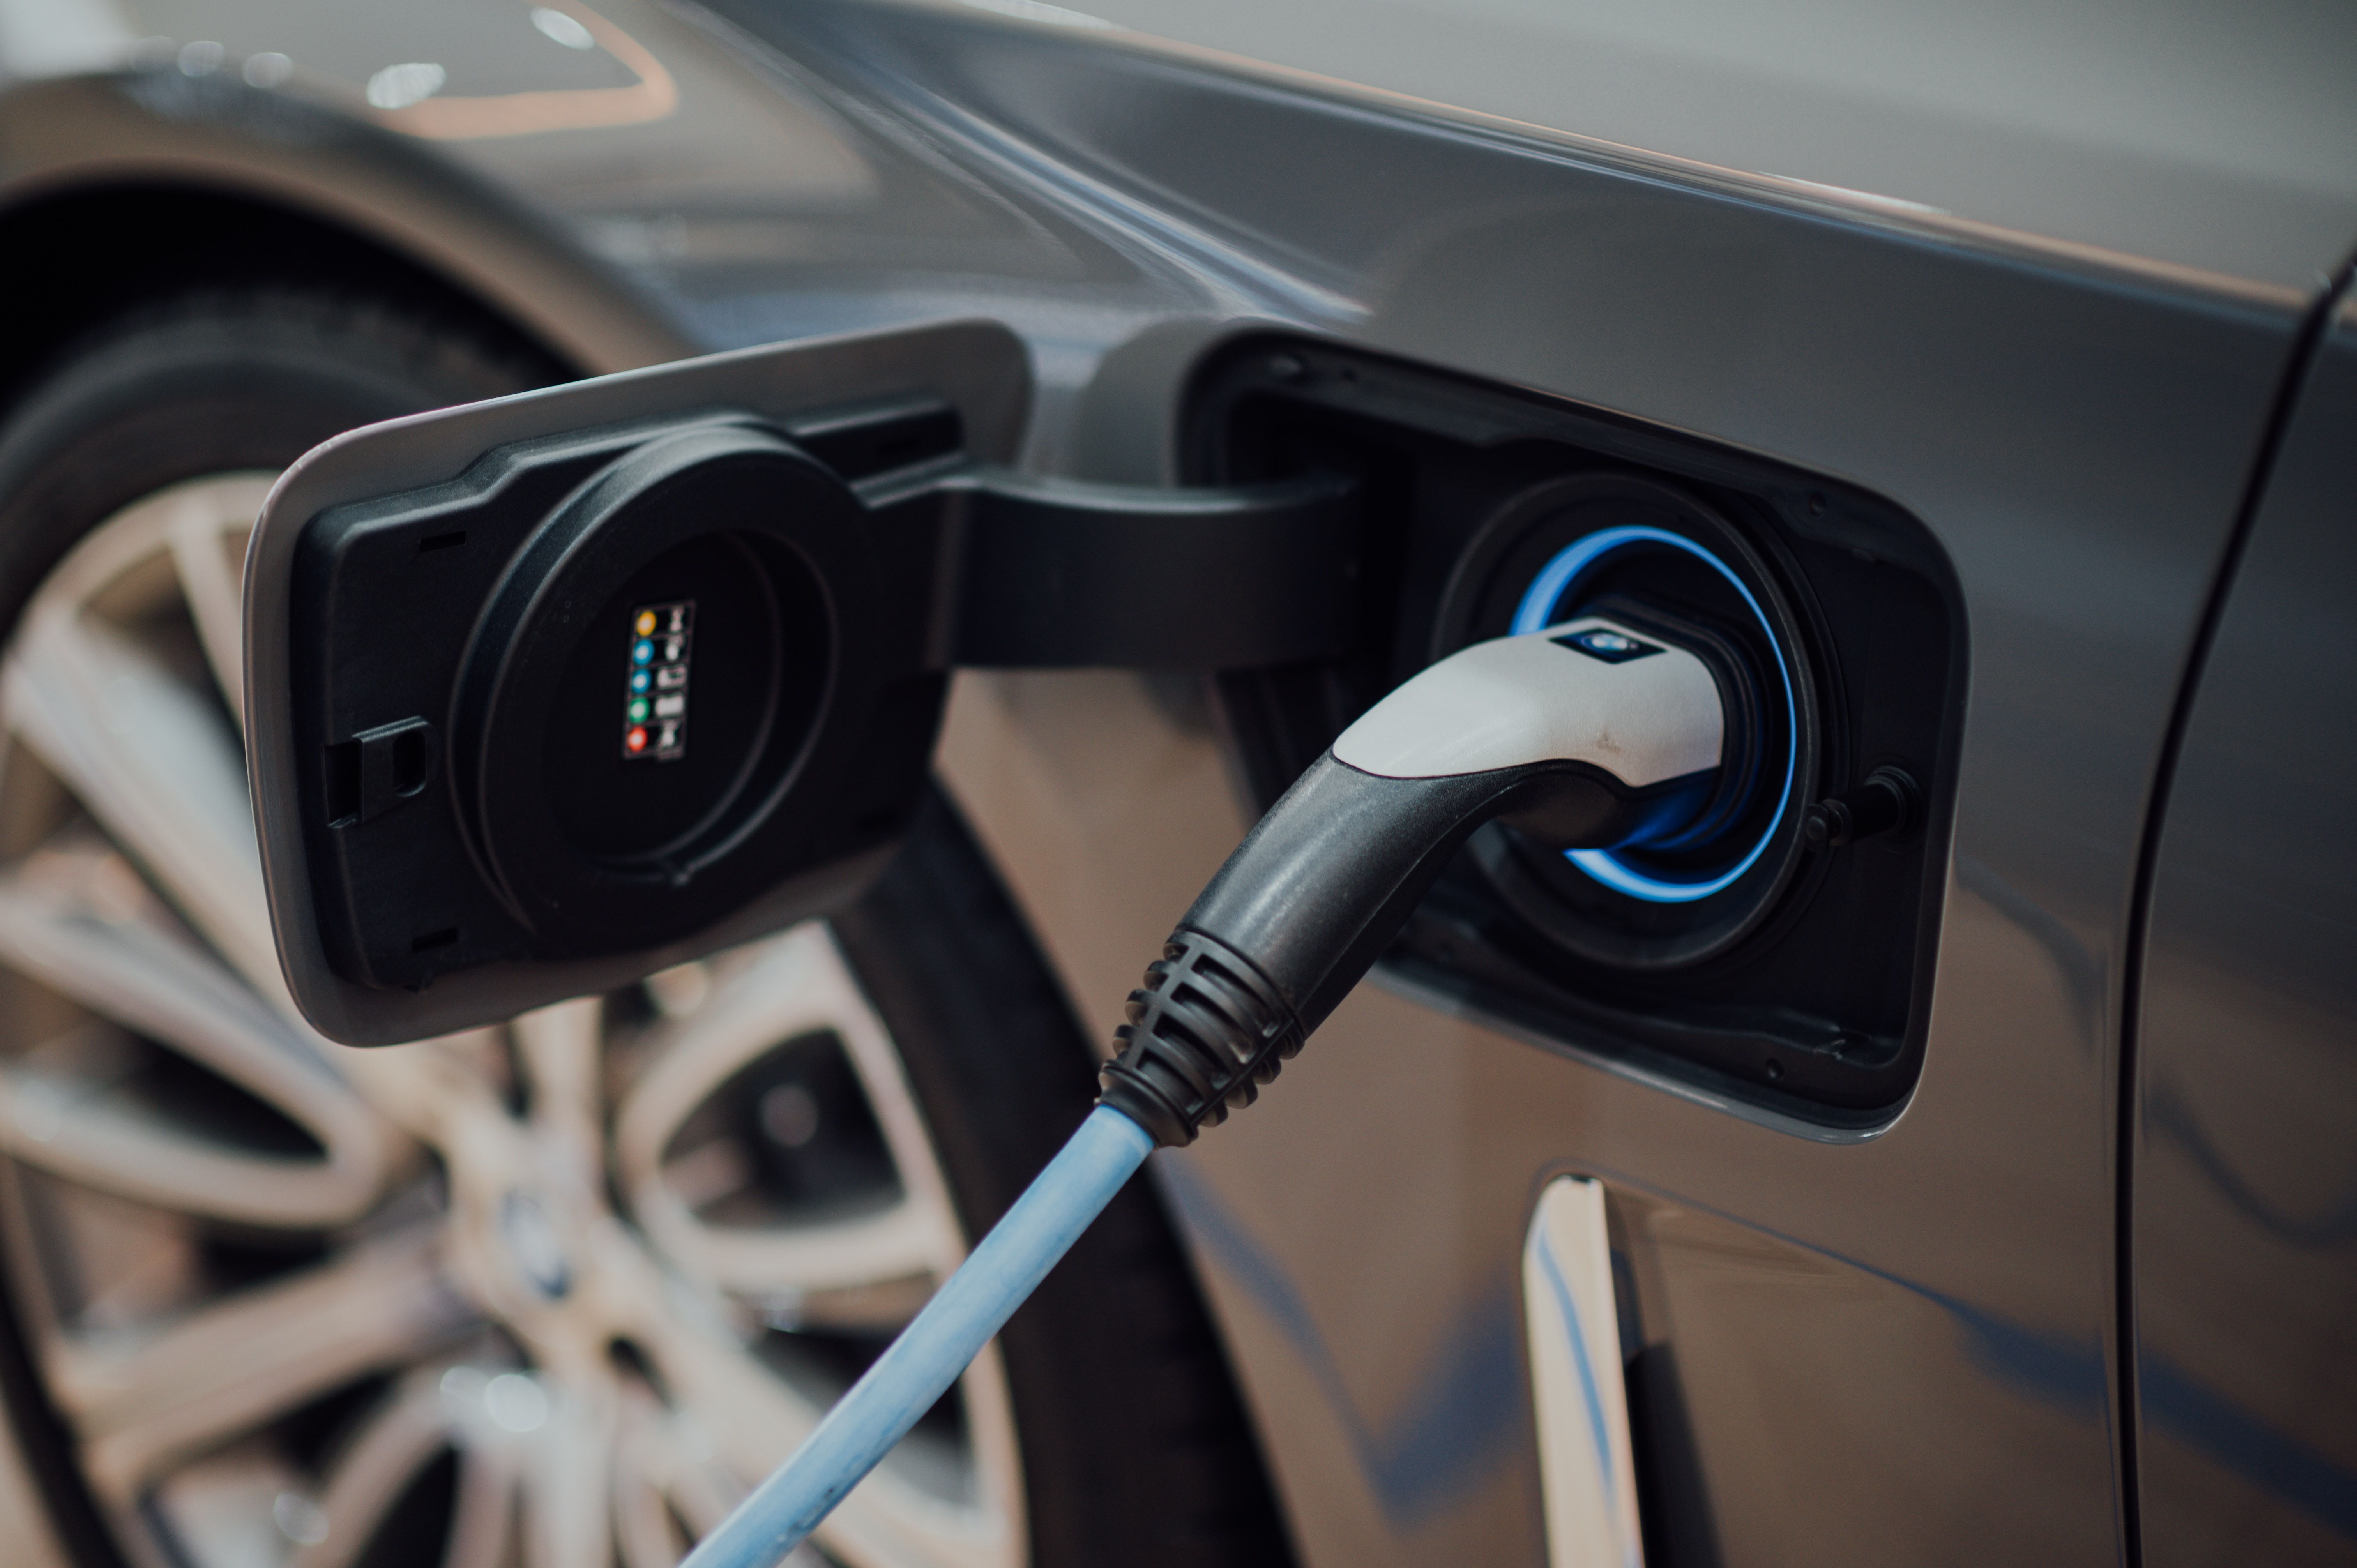 Electric care charging photo by https://unsplash.com/@chuttersnap